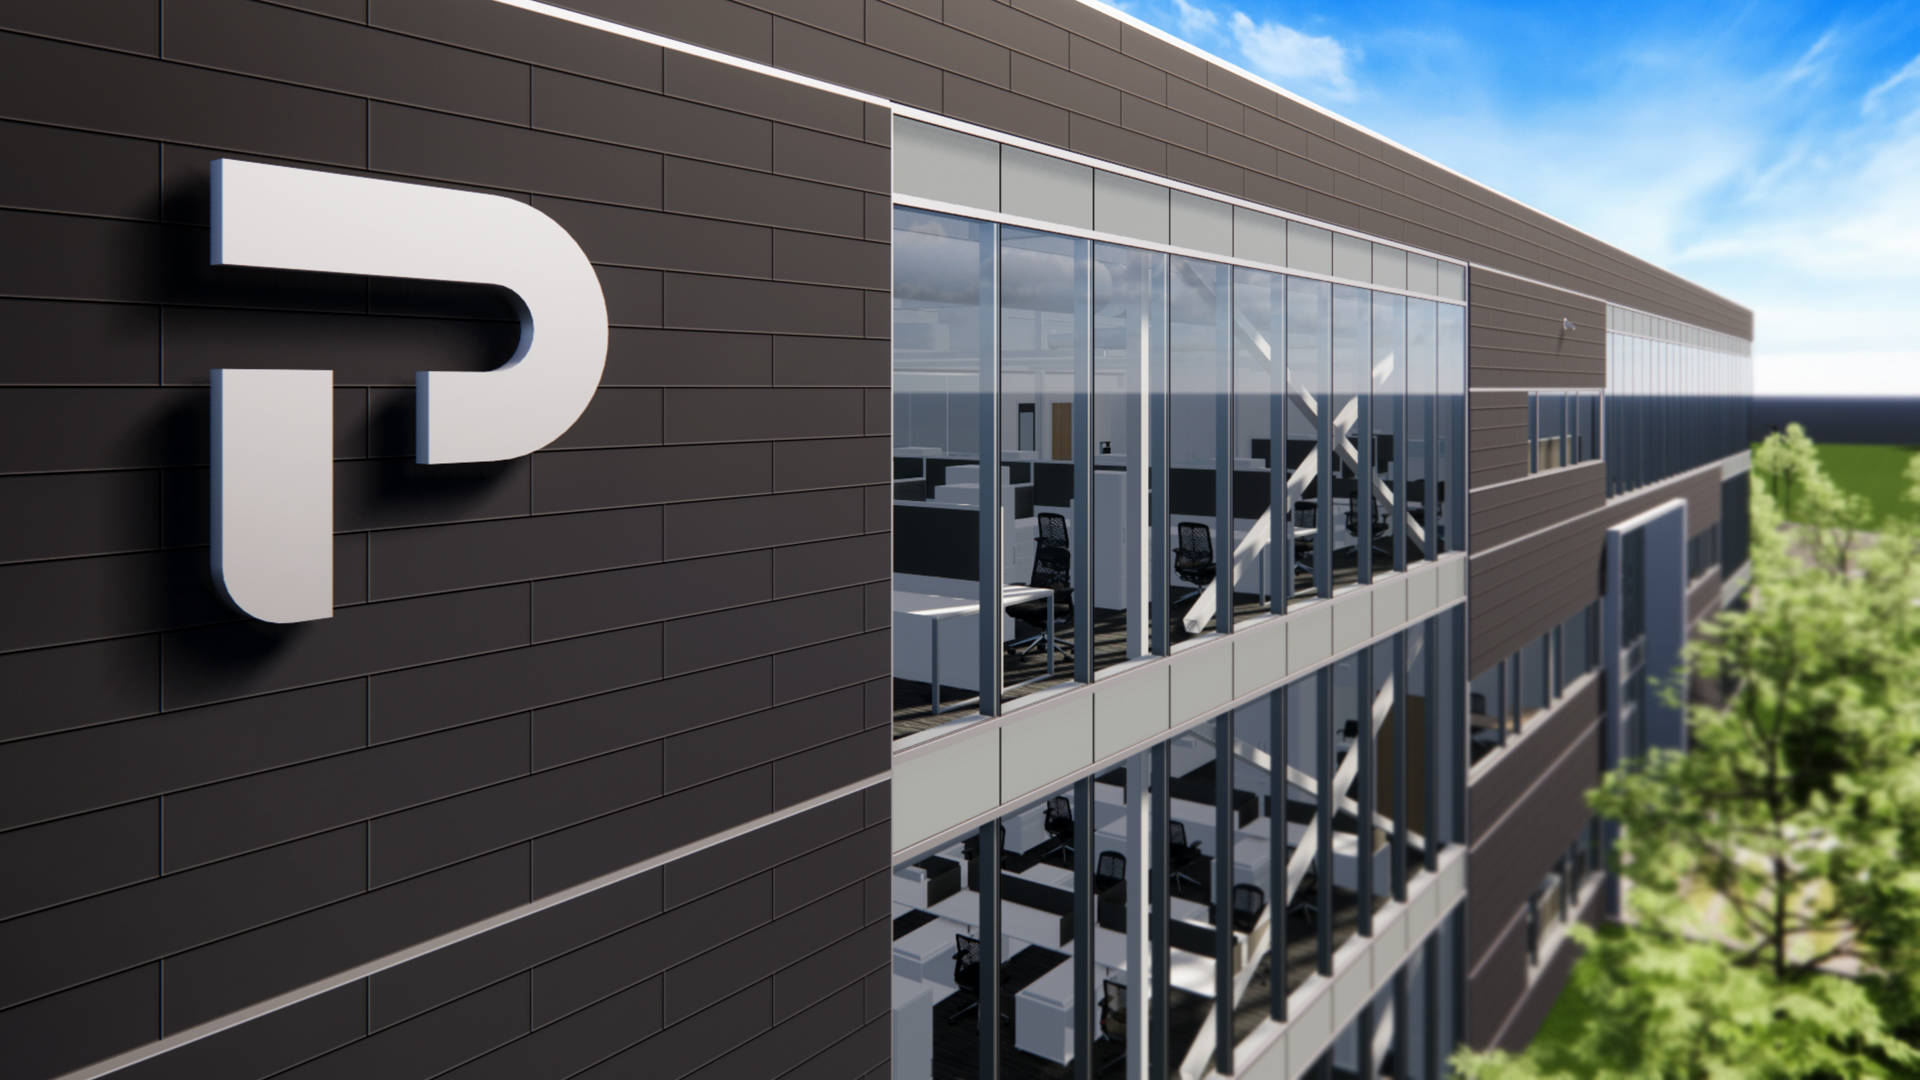 Premier Tech facility zoomed in on the PT logo